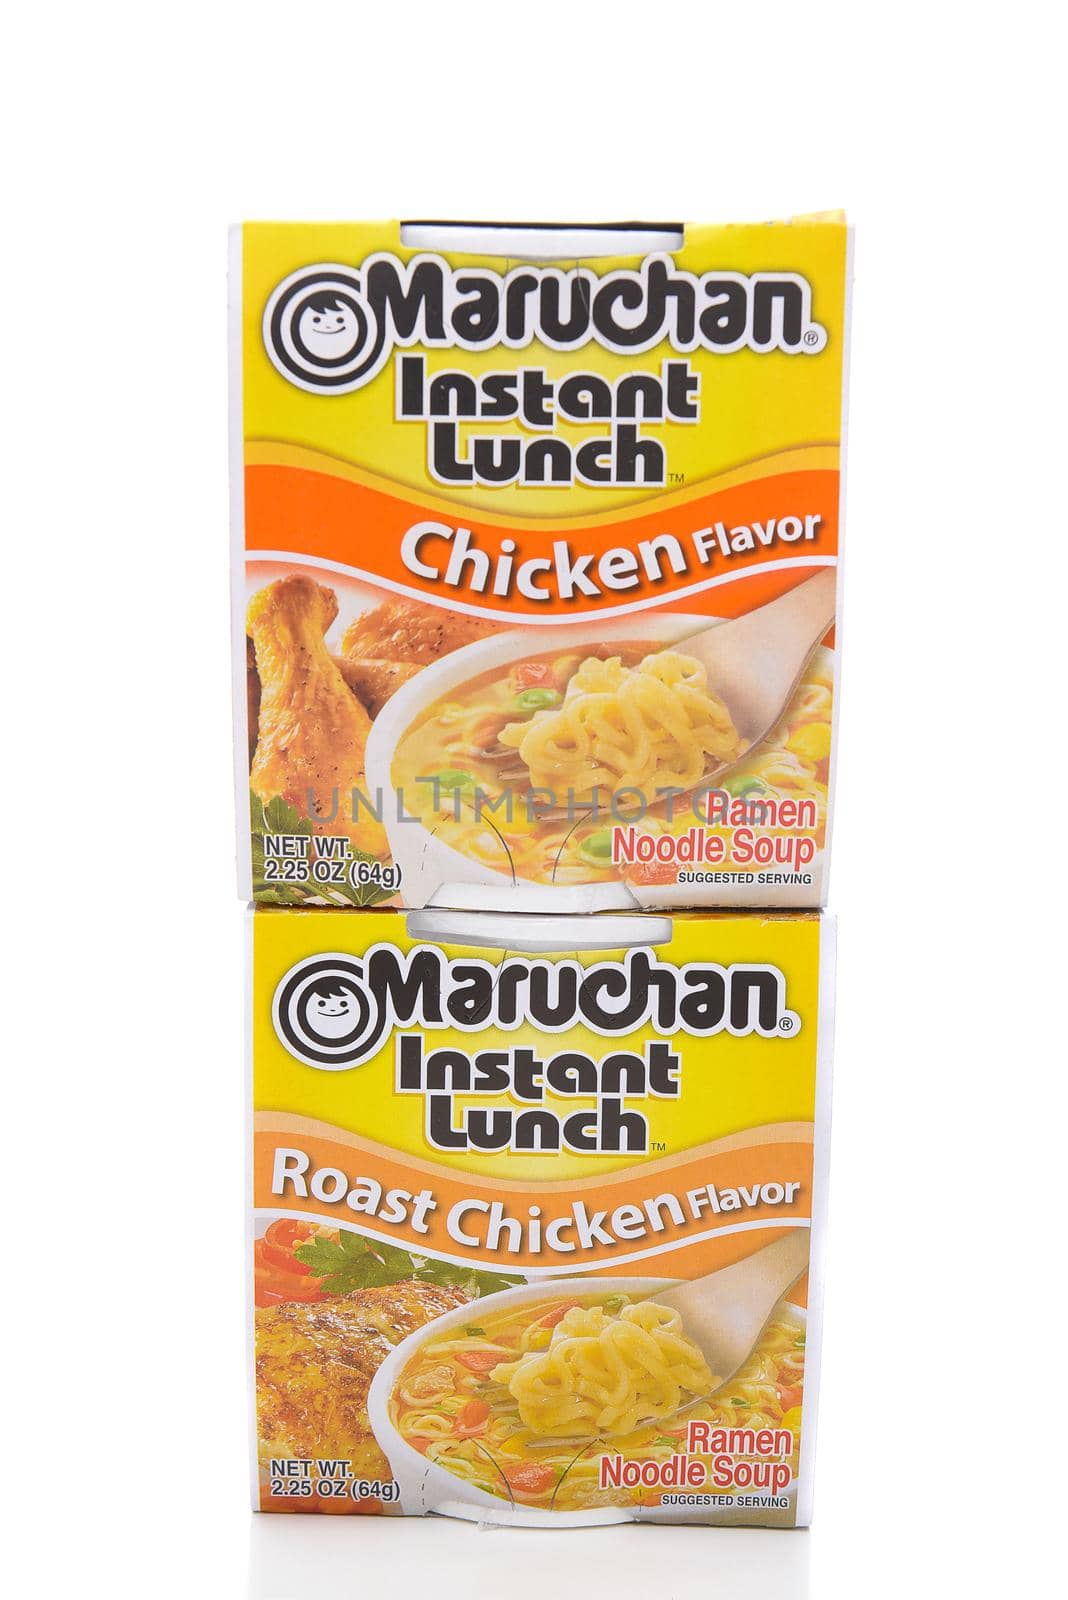 IRVINE, CALIFORNIA - MARCH 10,  2018: Maruchan Instant Lunch two Flavors, Maruchan began making the popular instant lunch in 1961.